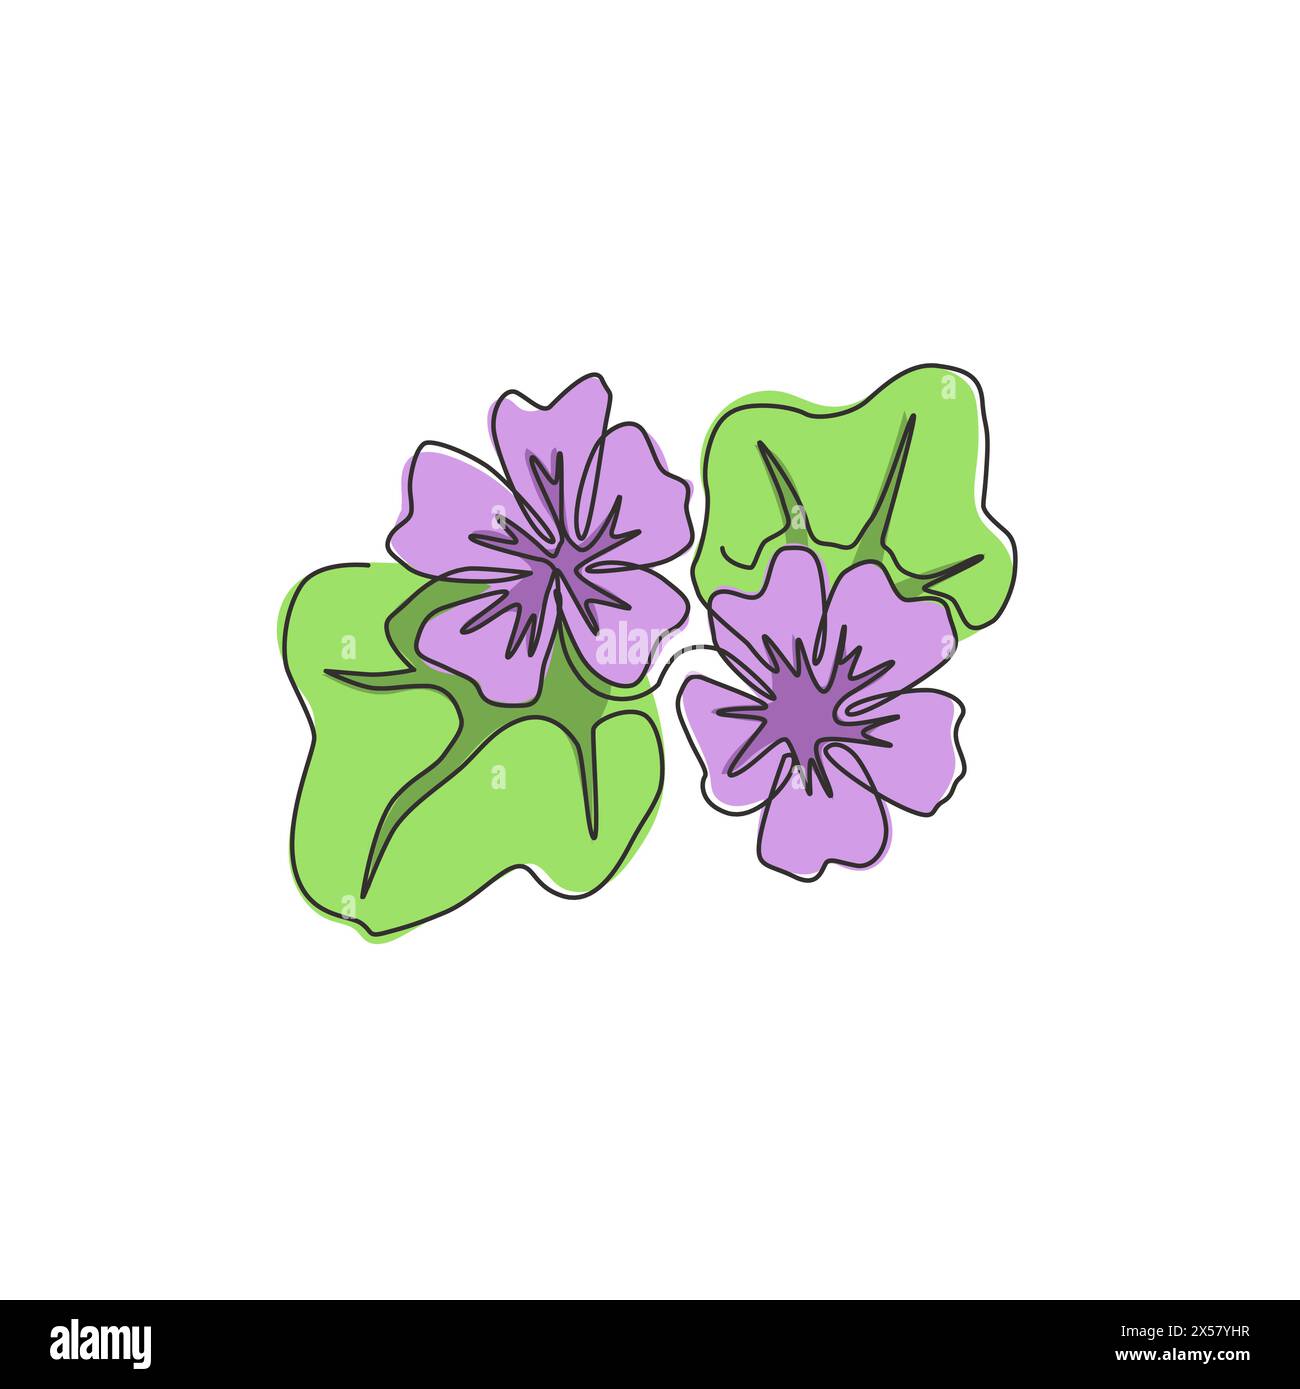 One continuous line drawing beauty fresh purple mallow for home decor poster wall art. Decorative malva sylvestris flower for wedding invitation card. Stock Vector